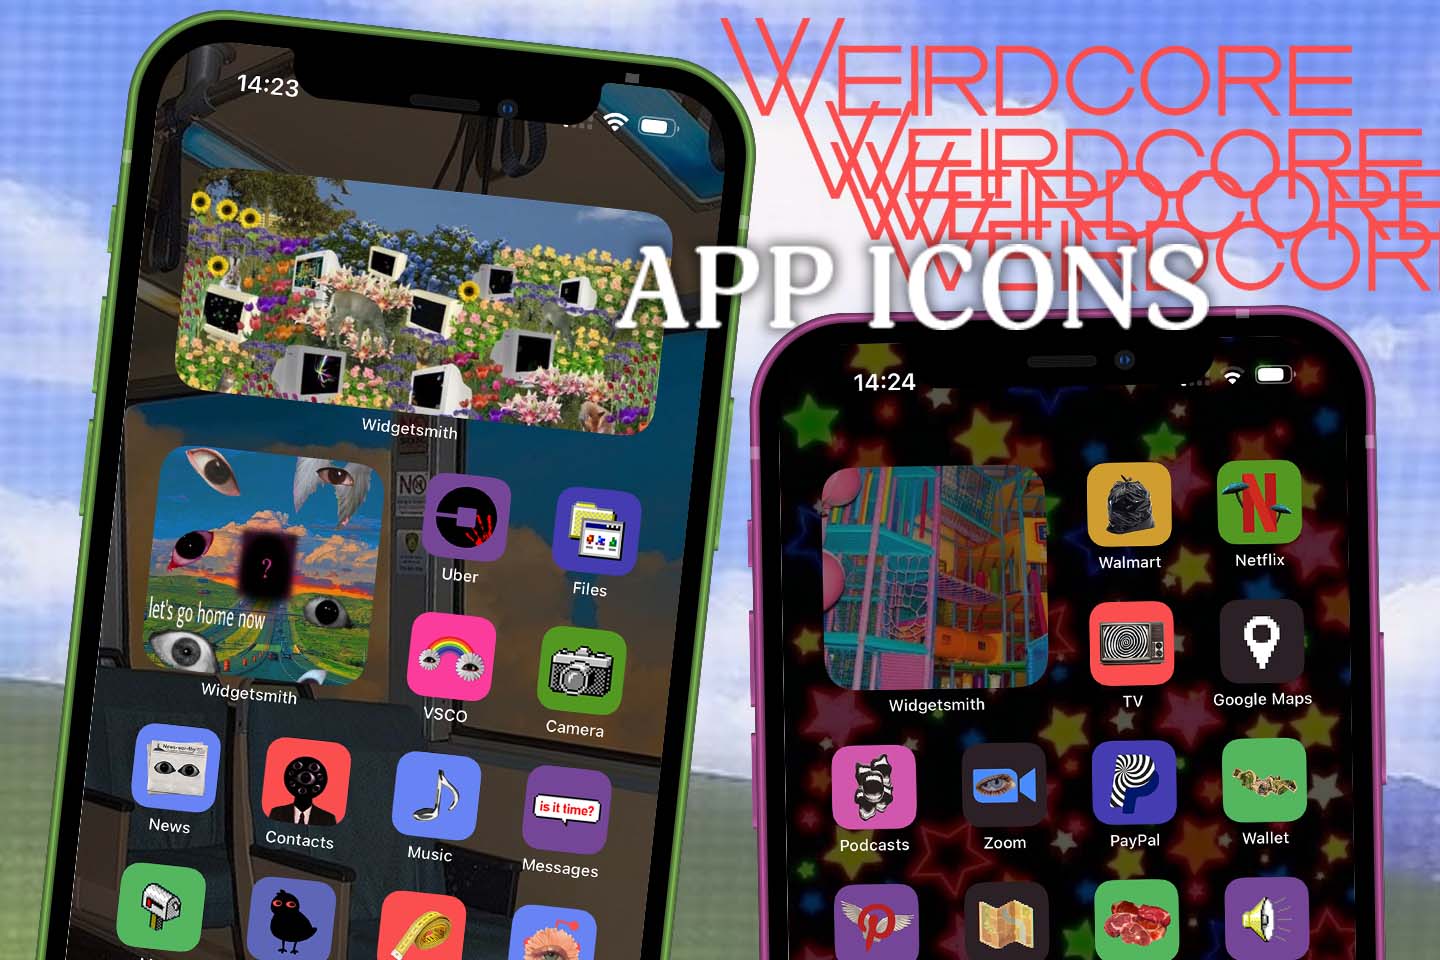 weirdcore app icons pack